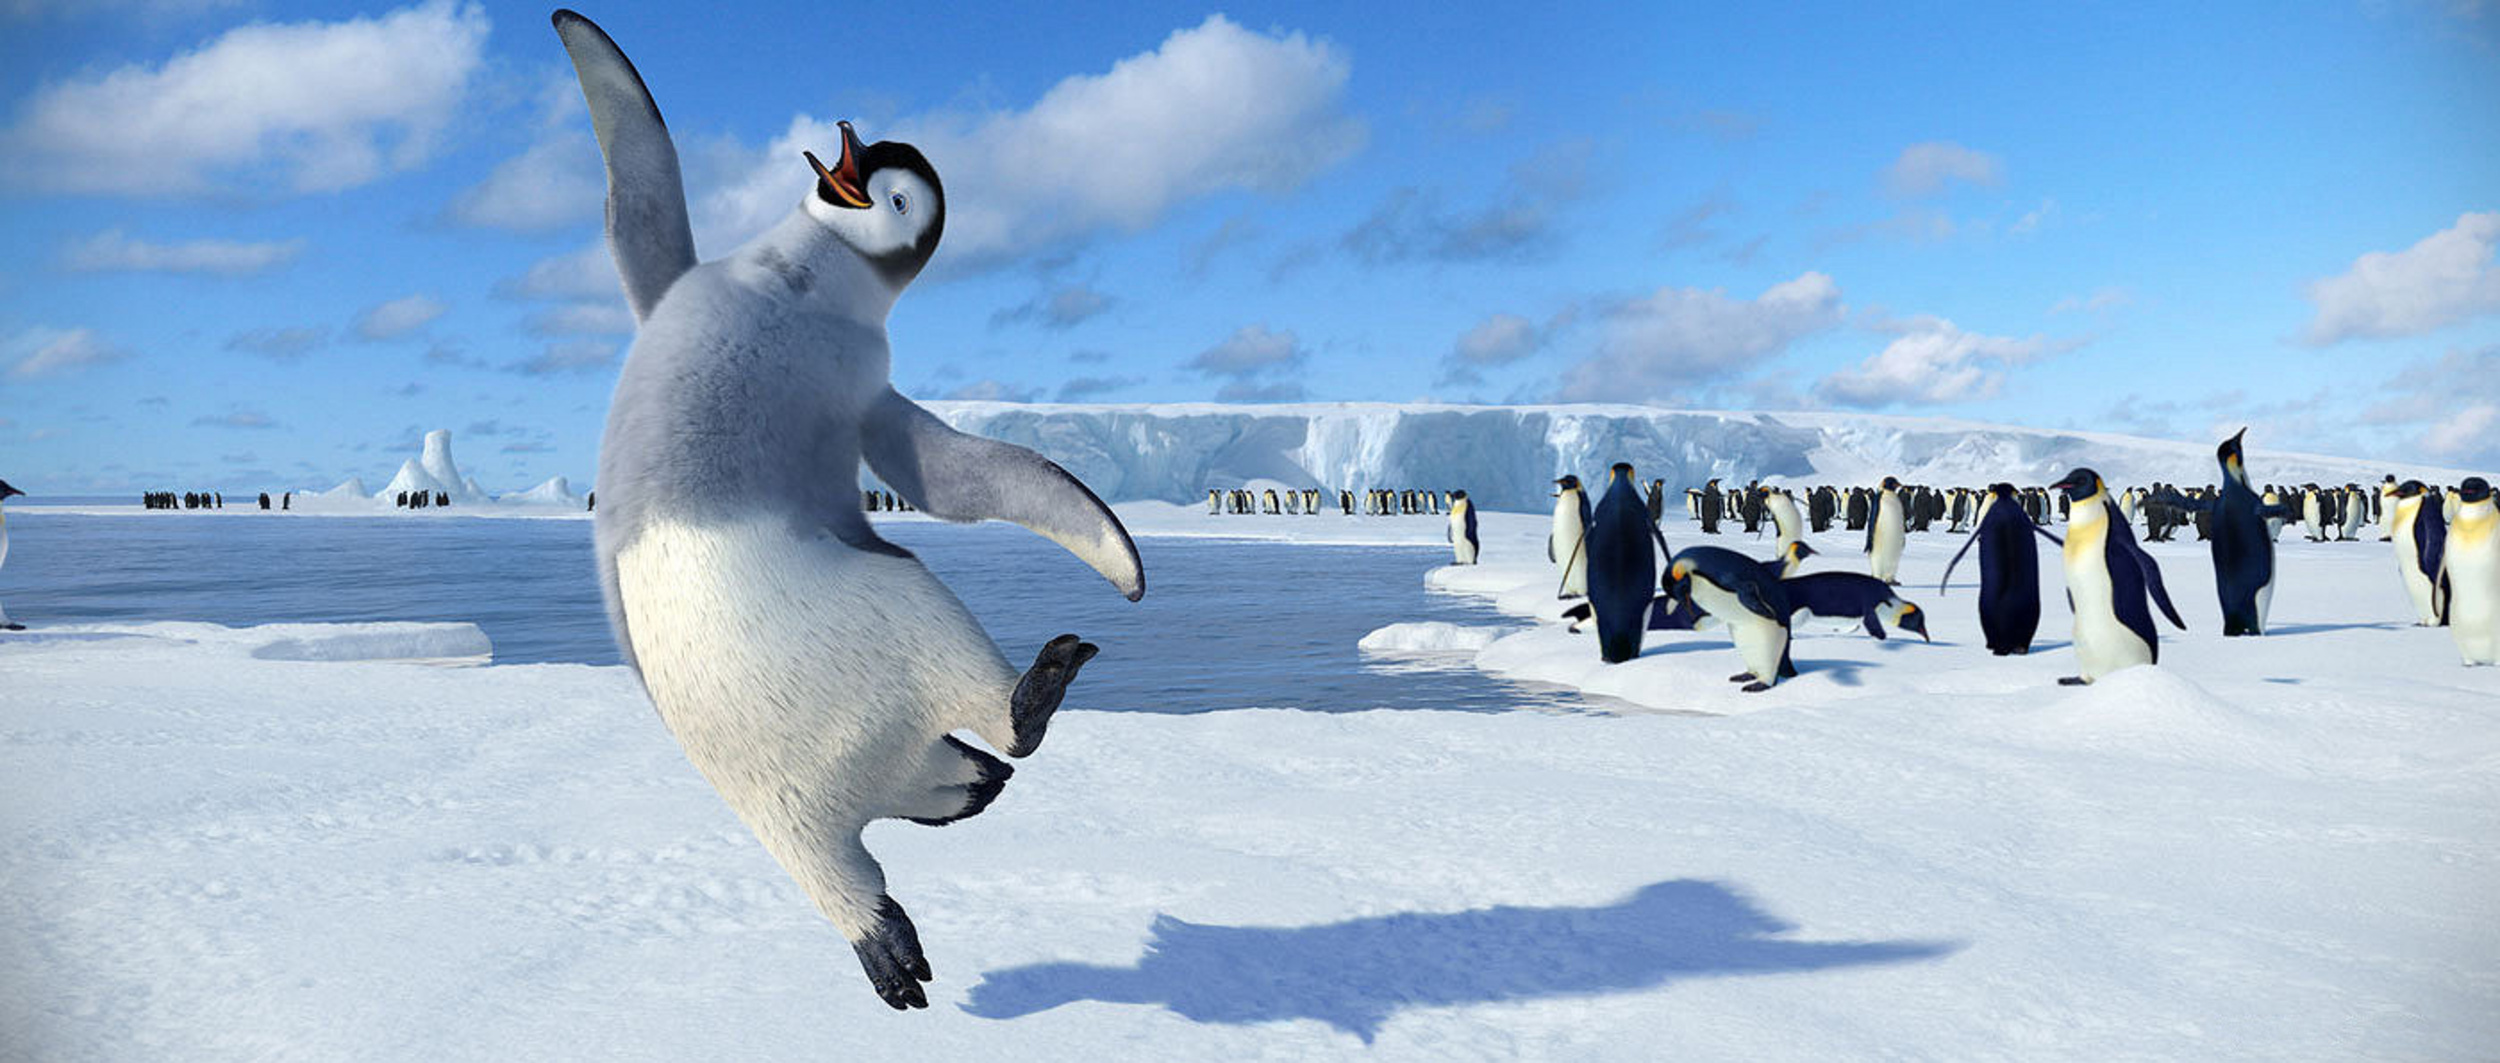 <p><span>Being an adorable penguin that dances will never hurt one’s appeal to the masses.</span></p><p><a href='https://www.msn.com/en-us/community/channel/vid-cj9pqbr0vn9in2b6ddcd8sfgpfq6x6utp44fssrv6mc2gtybw0us'>Follow us on MSN to see more of our exclusive entertainment content.</a></p>